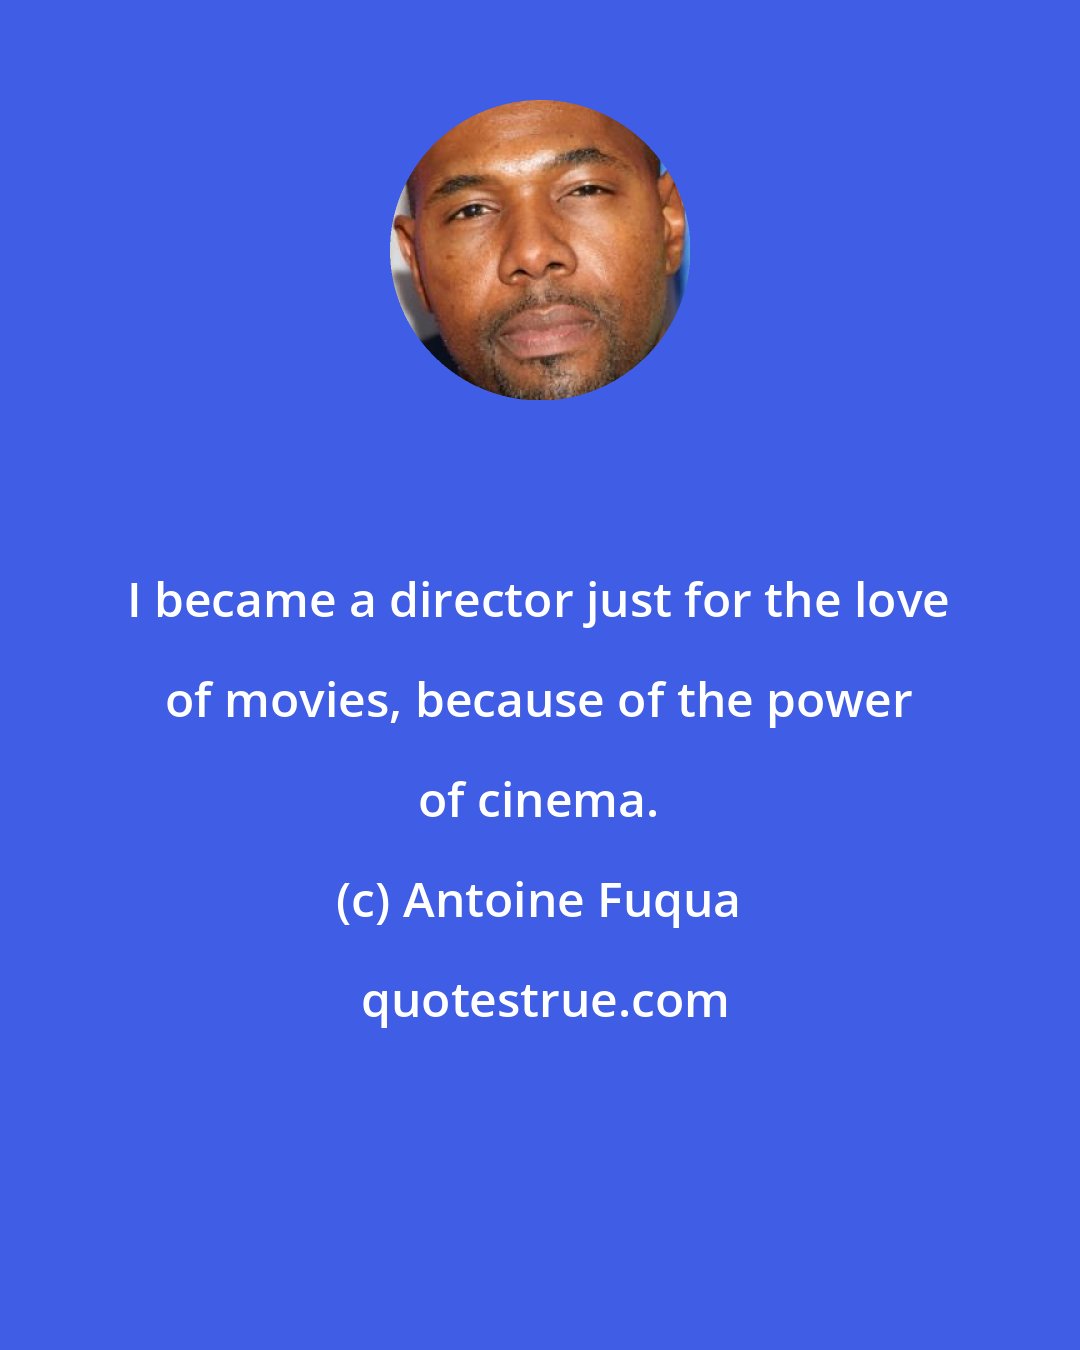 Antoine Fuqua: I became a director just for the love of movies, because of the power of cinema.